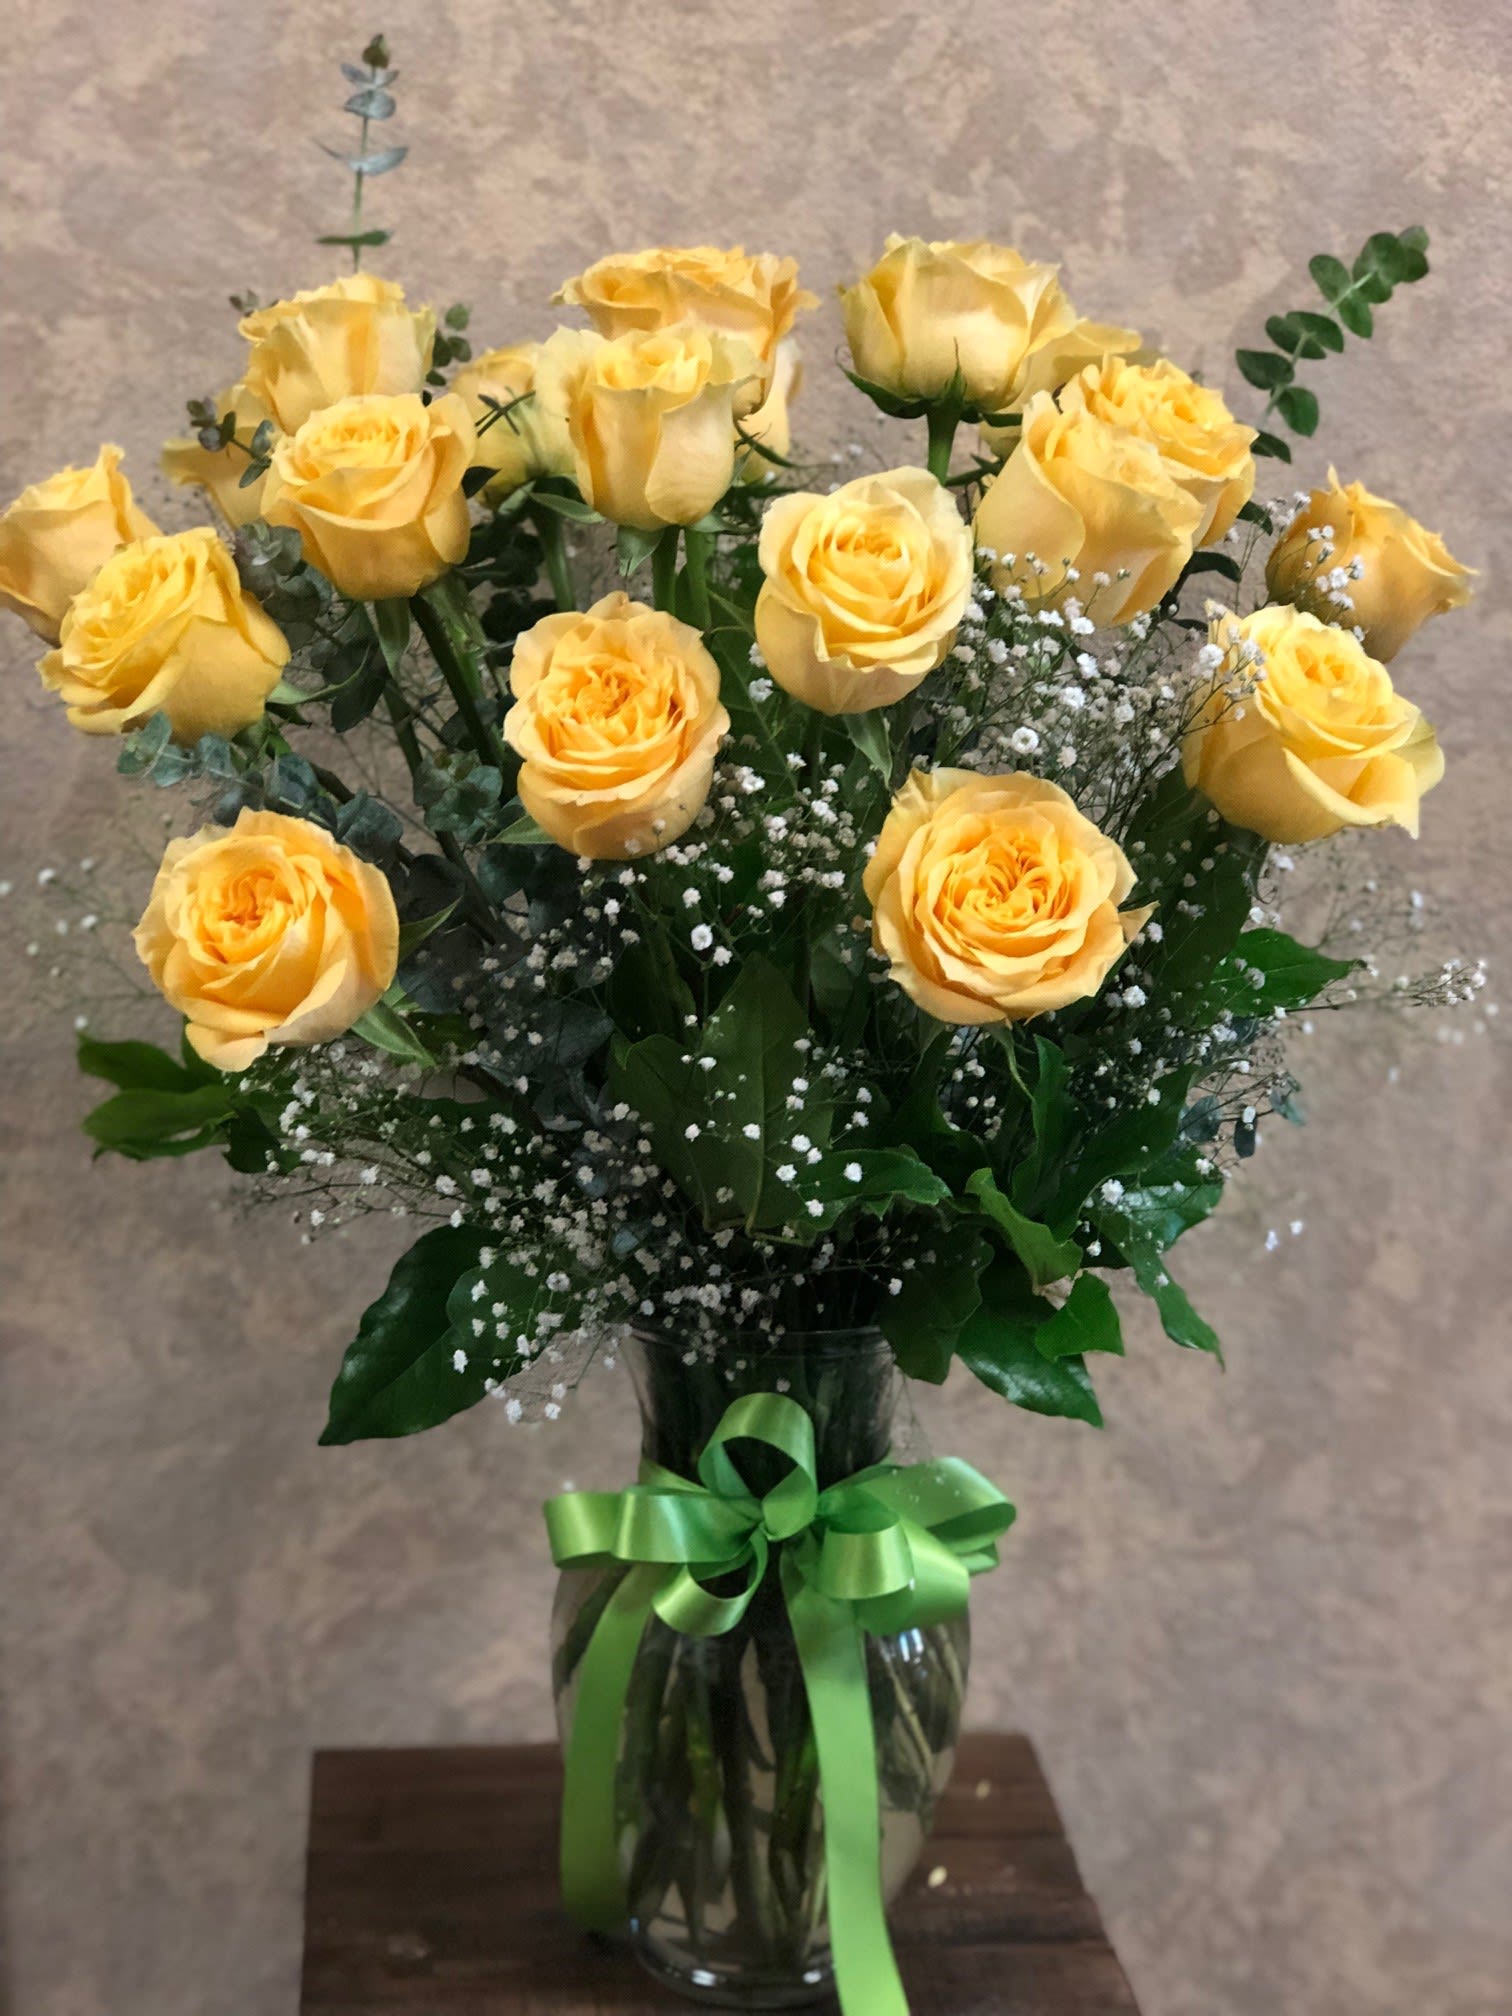 18 Premium Long Stemmed Yellow Roses (available in all colors) - Premium Long Stemmed Ecuadorian roses with green ribbon. These Yellow Roses with baby's breath will be a perfect friendly gift to say thank you or cheer someone up!  Other color roses are available. Please let us know in special instructions.  APPROXIMATE DIMENSIONS: 25&quot; H X 18&quot; W